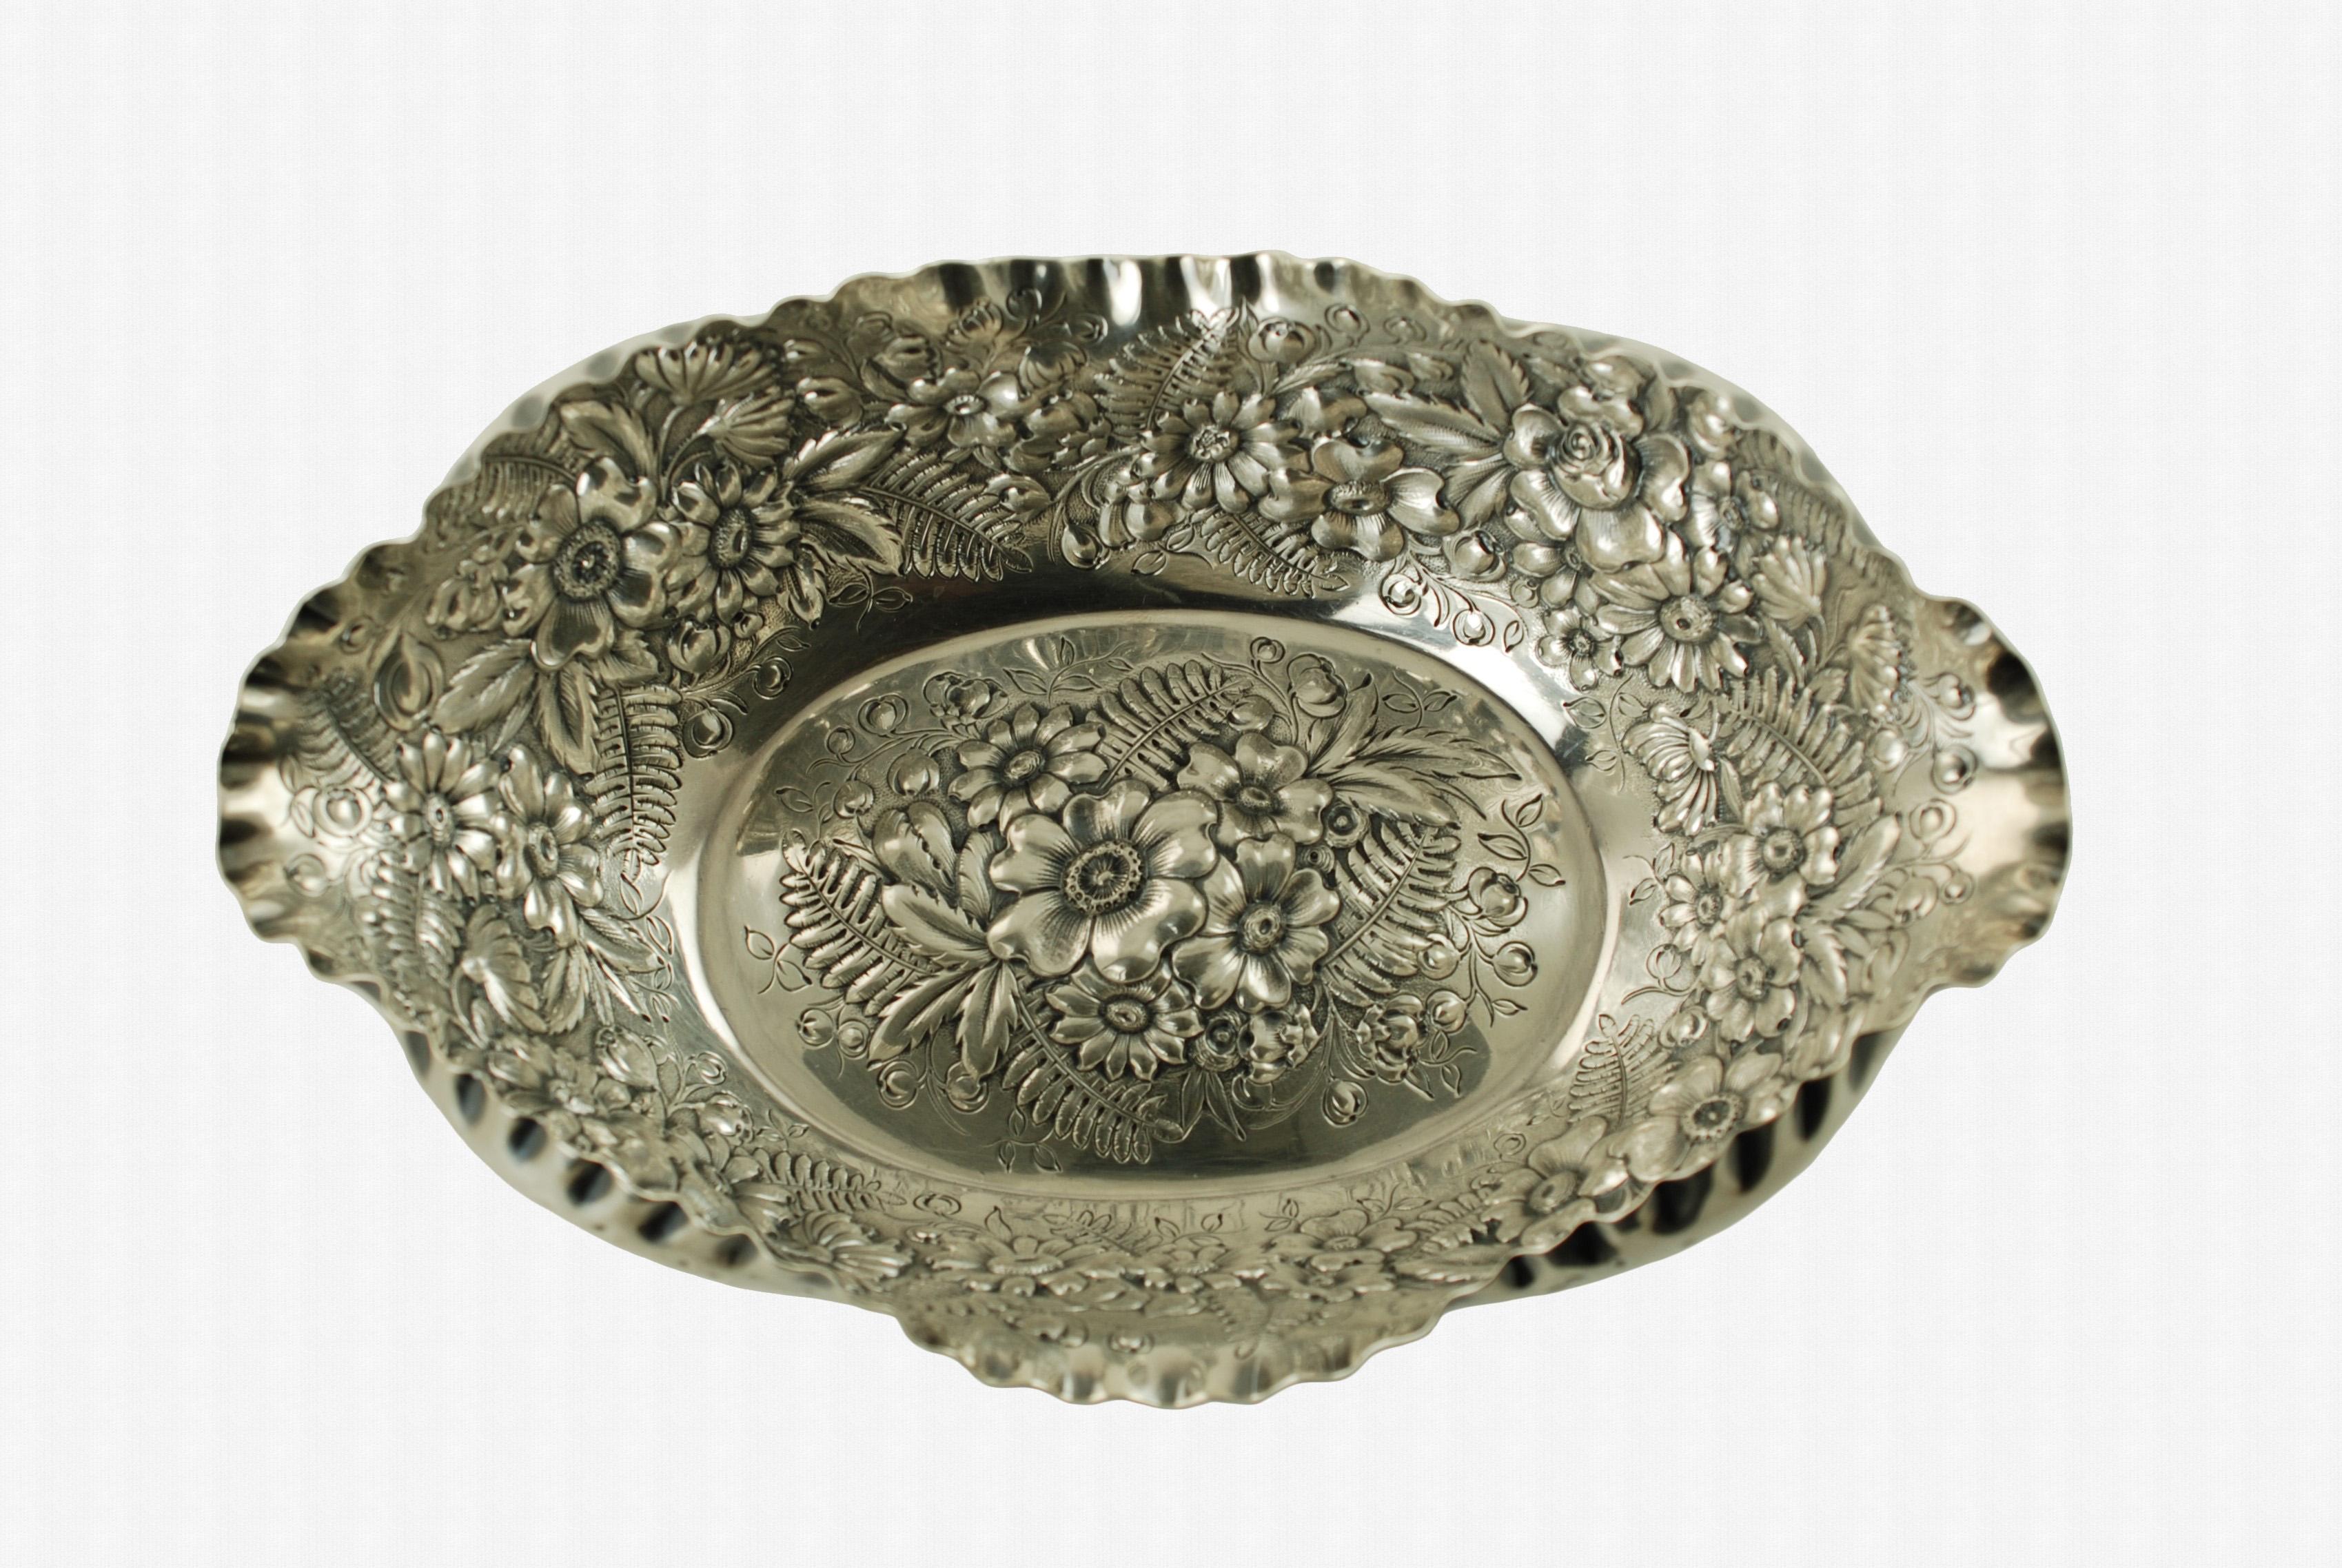 Antique Tiffany & Company Sterling Silver Fern and Flowers Repousse Bowl For Sale